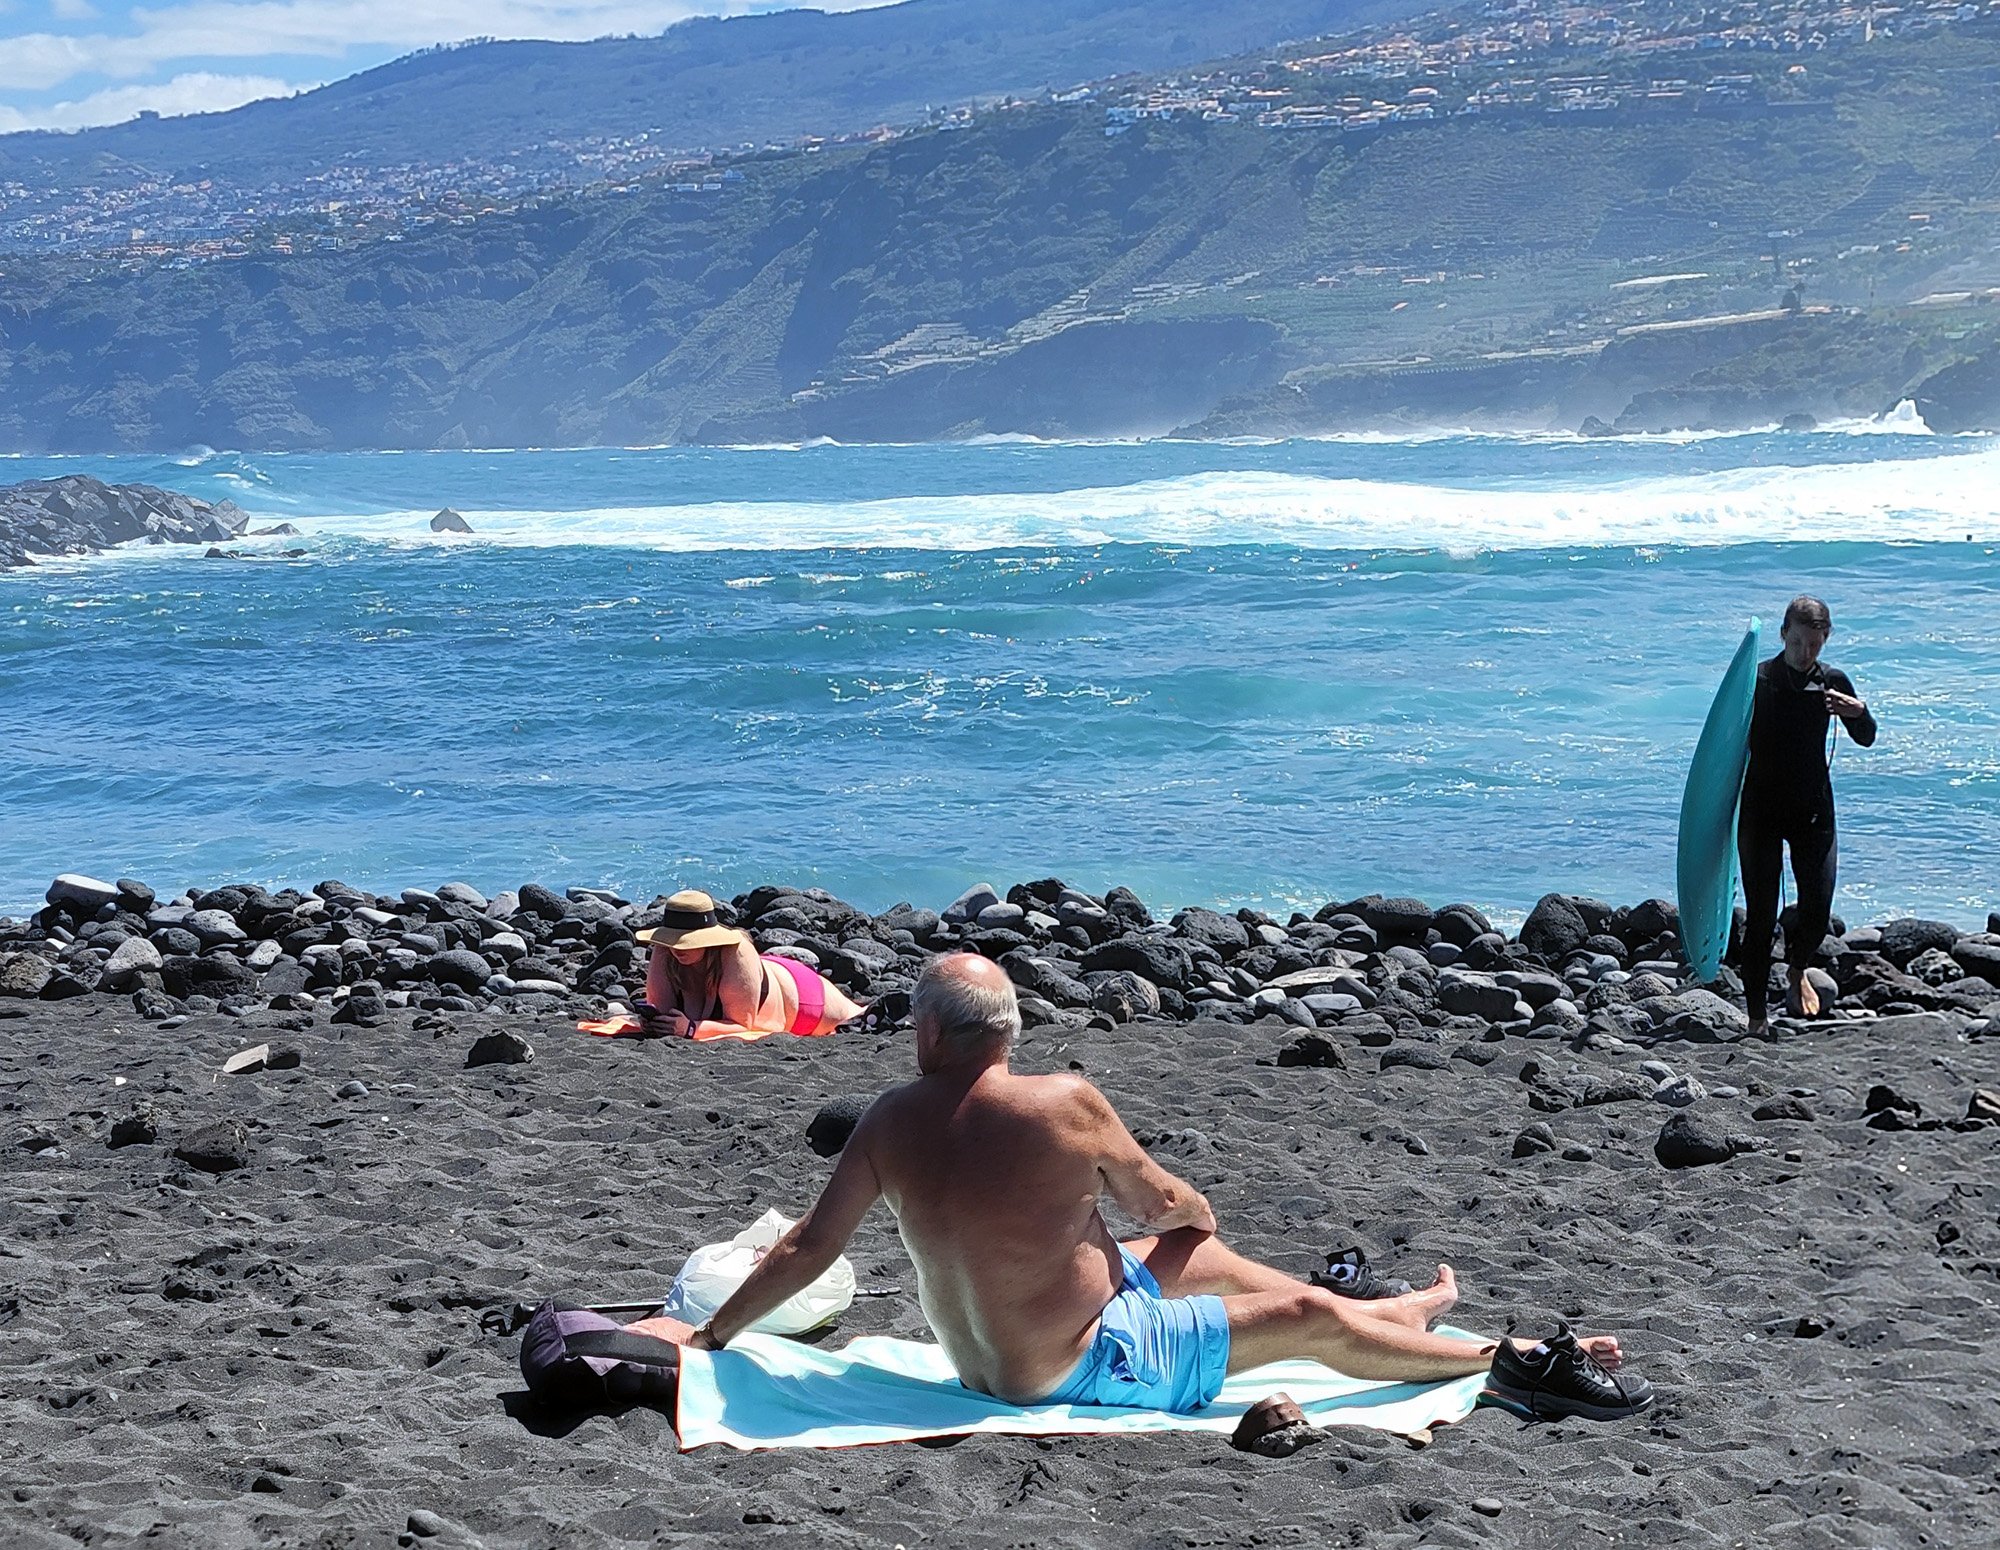 Black Sand beach with a nice view of Teide on a clear day. Now that's the life. Imagine not having to bike. So lucky.